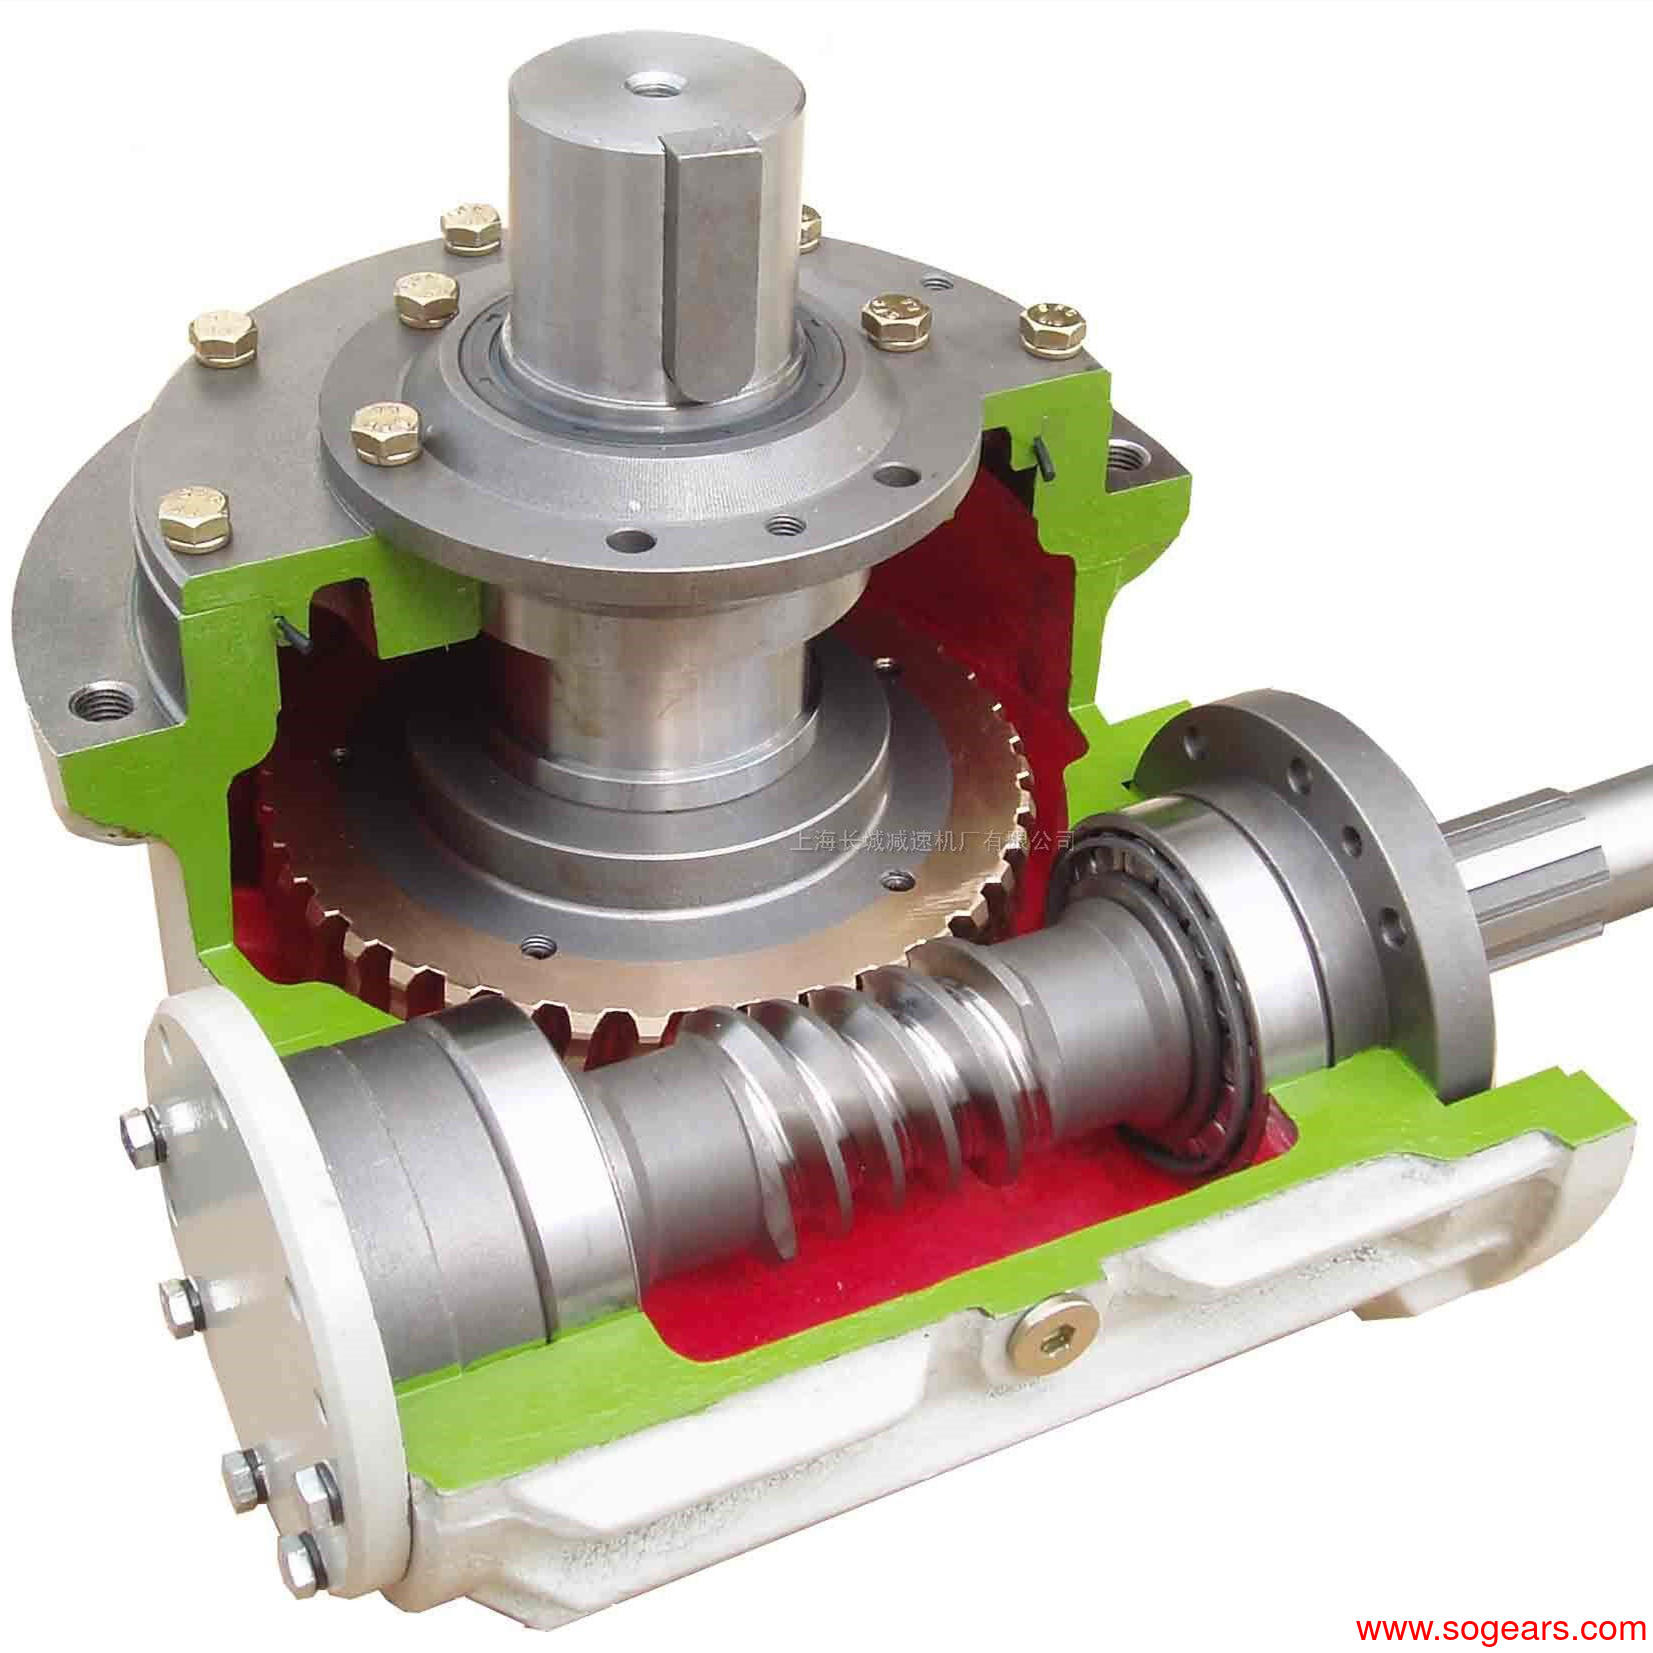 Small worm gearbox